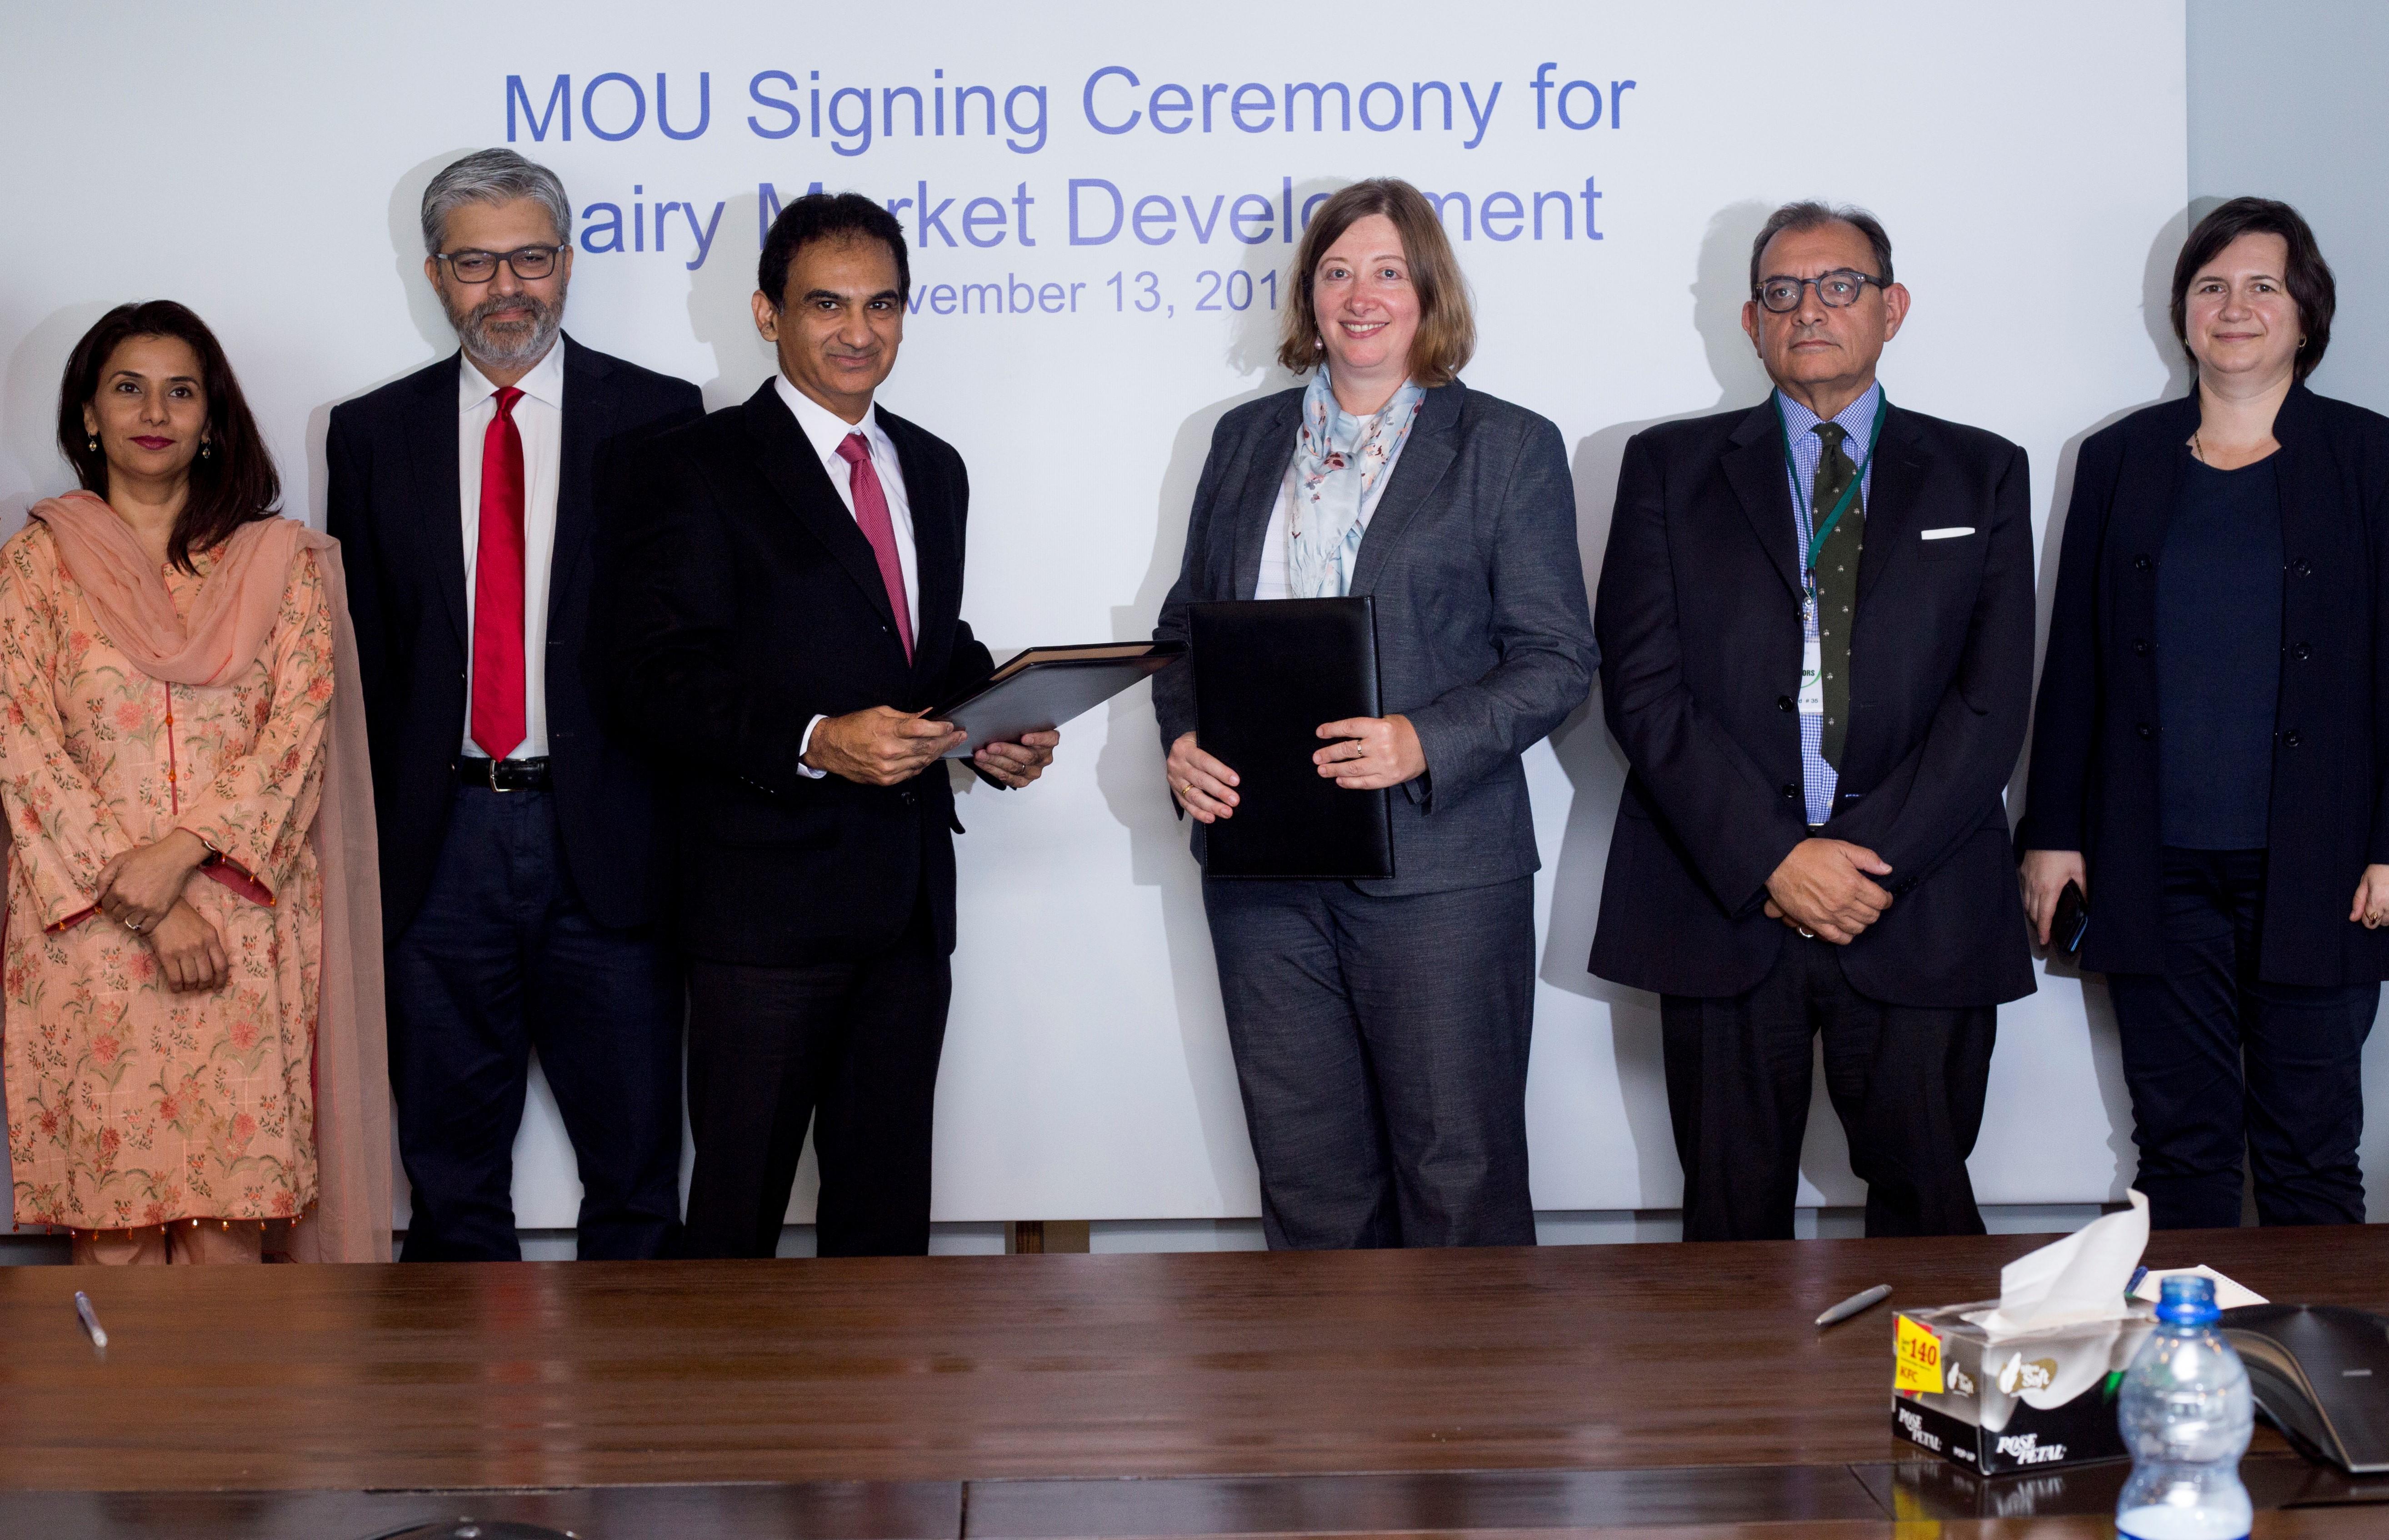 Engro Foods Limited inks MOU with International Finance Corporation for Dairy Market Development